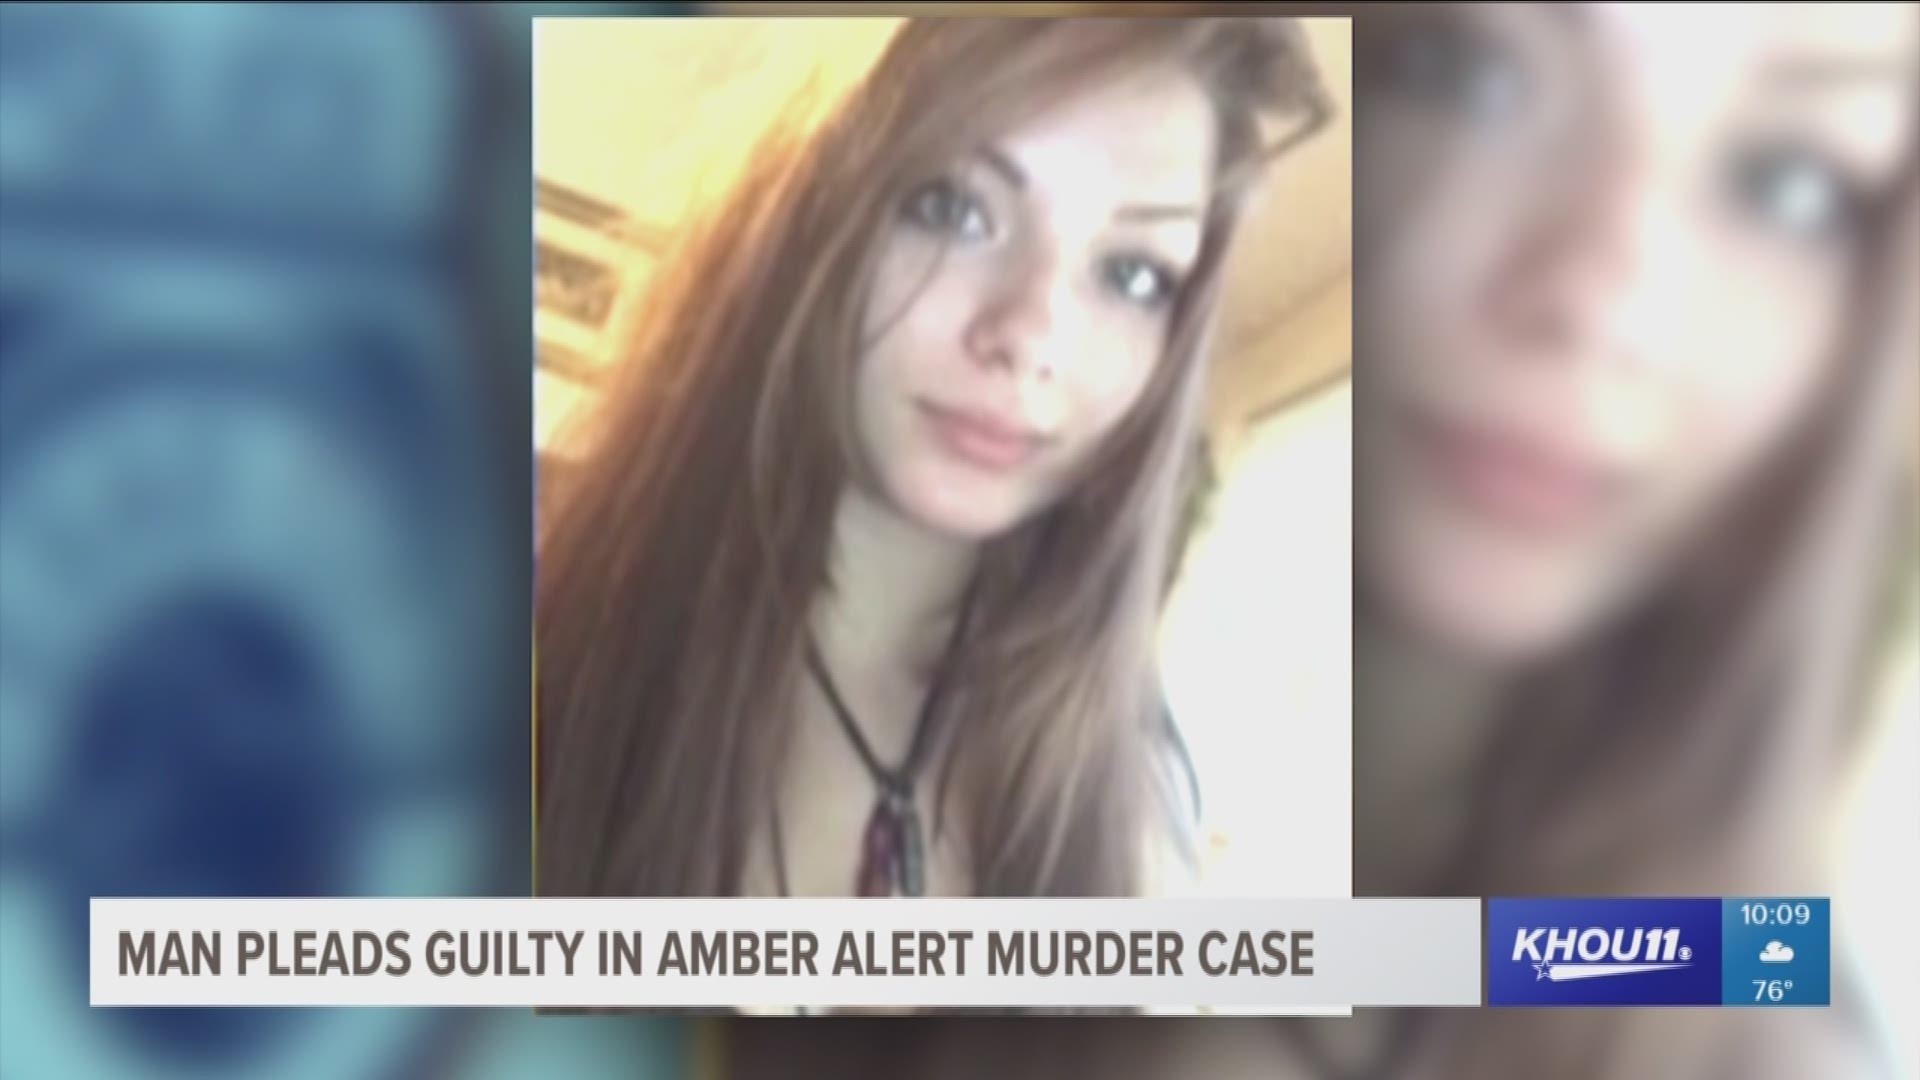 The boyfriend of a teenage girl who was found dead in 2016 pleaded guilty to her murder this week.